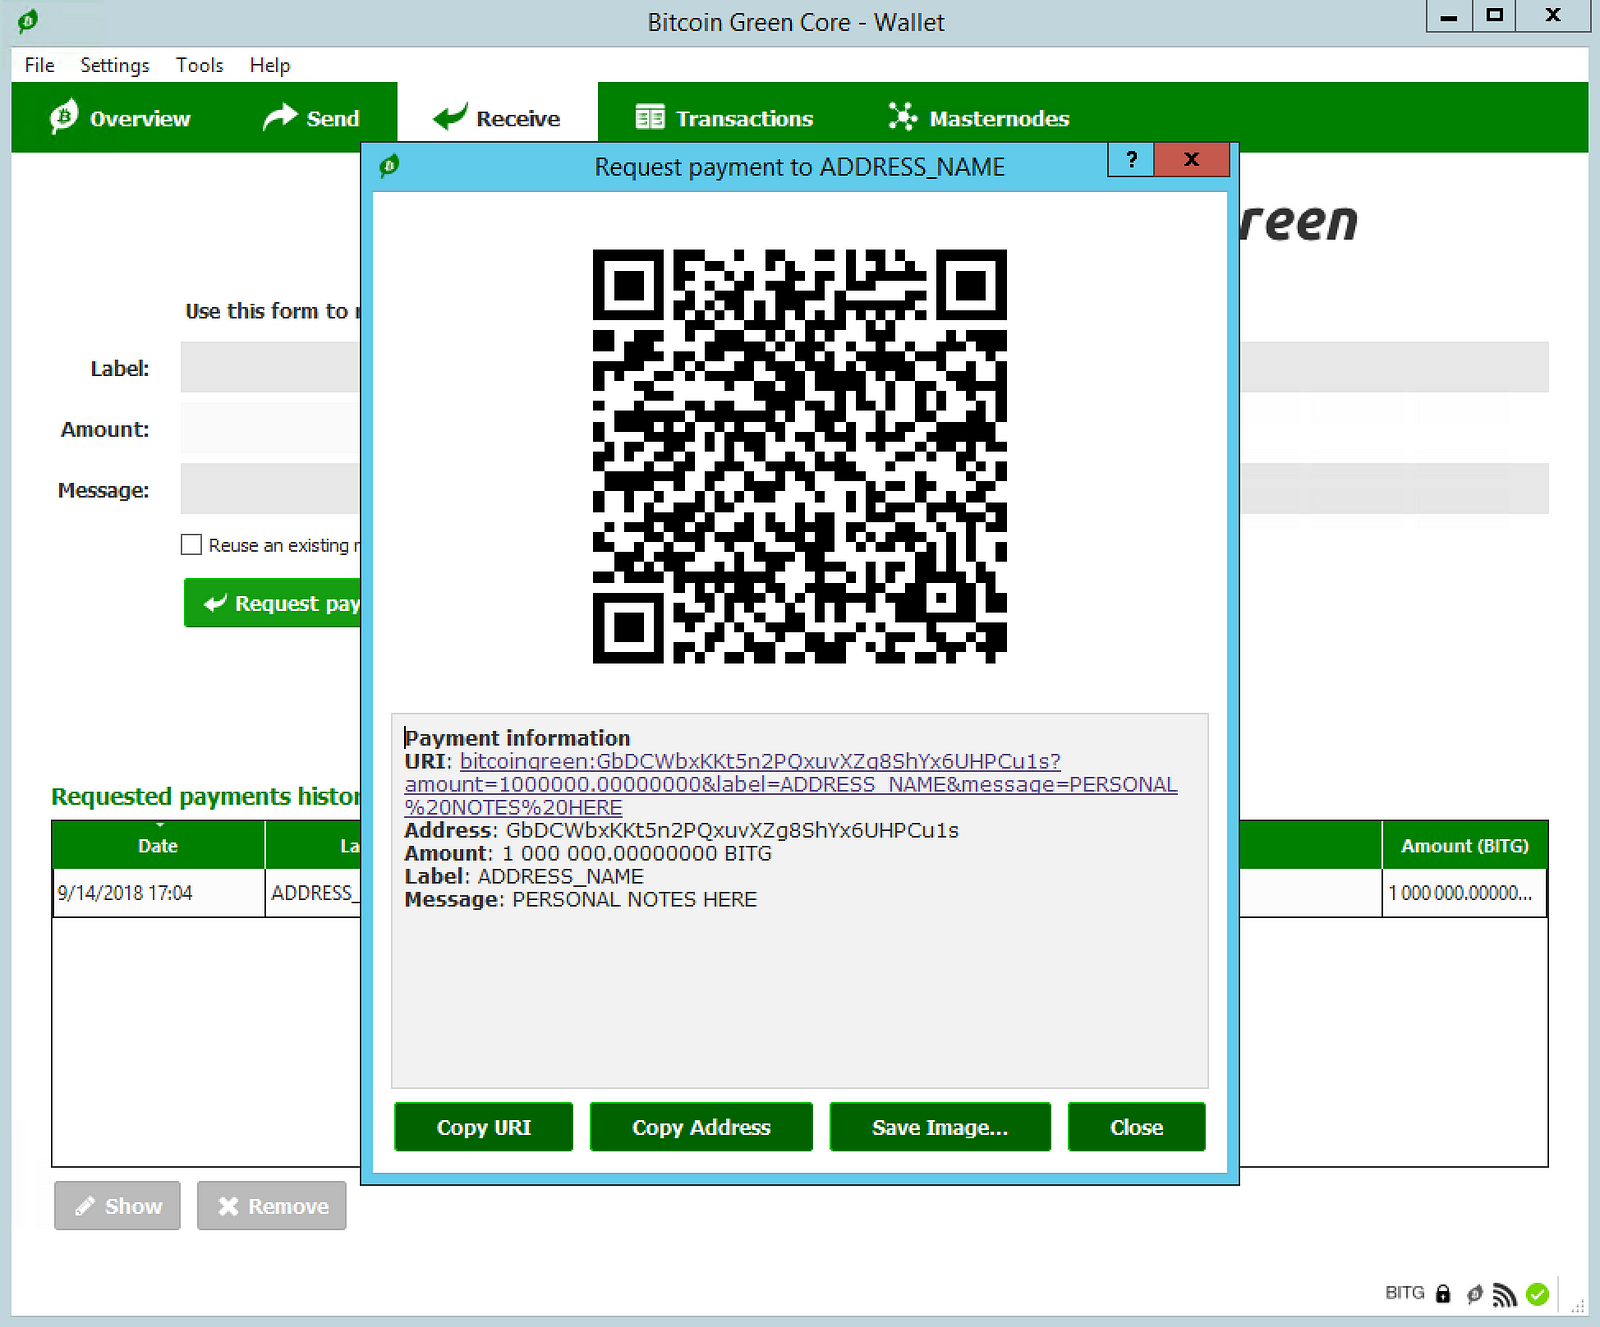 How To Set Up Bitcoin Green Wallet (Proof-Of-Stake Wallet Setup Guide)